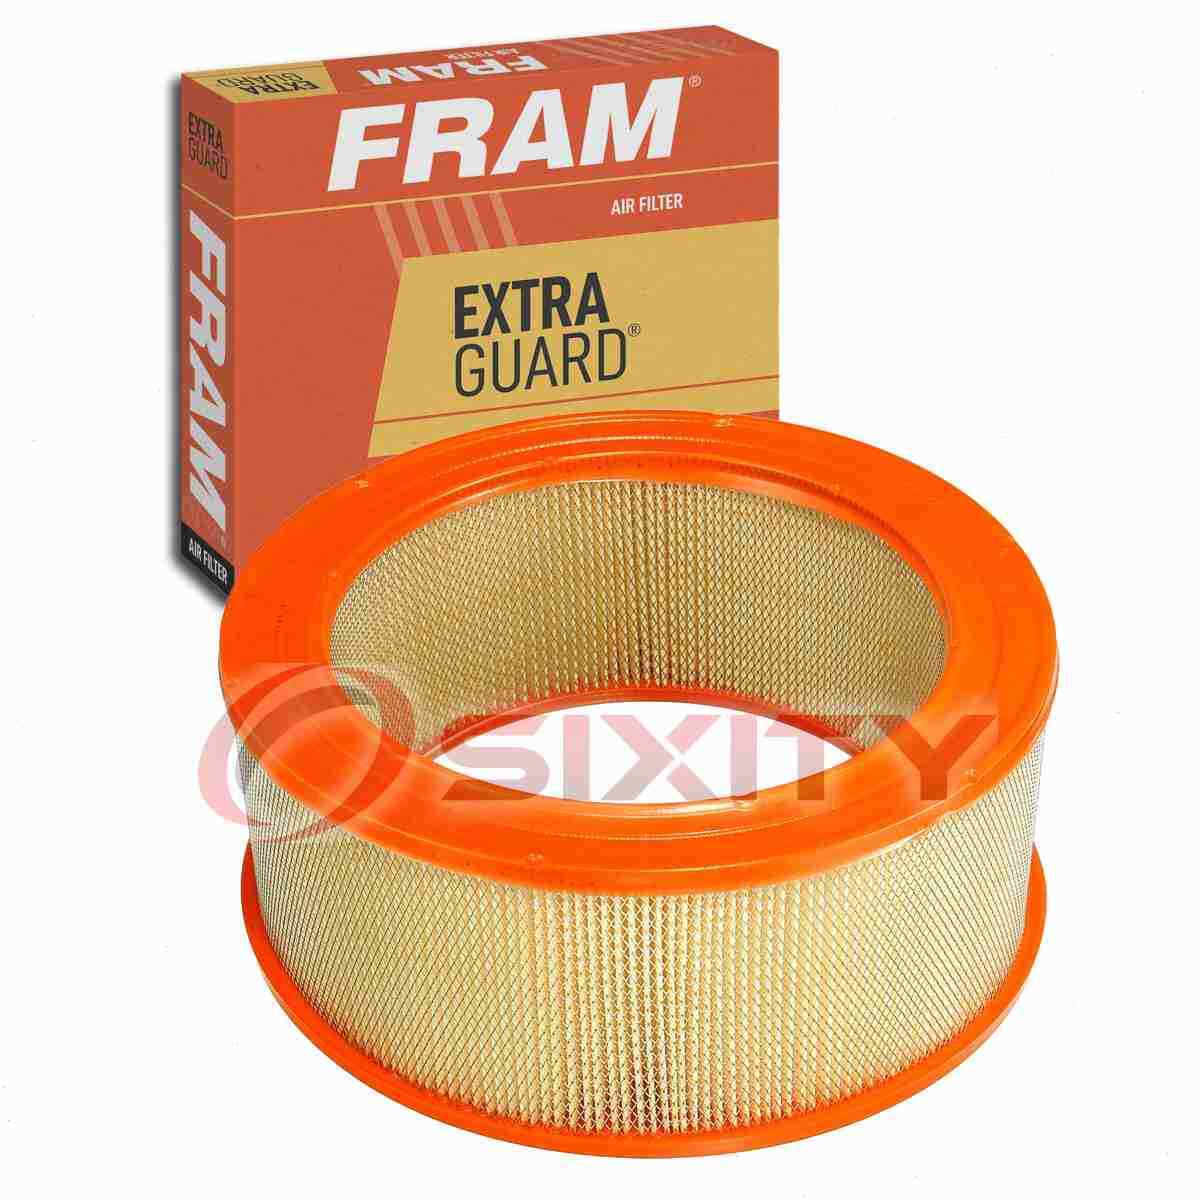 FRAM Extra Guard Air Filter for 1956-1957 Chevrolet Two-Ten Series Intake sv